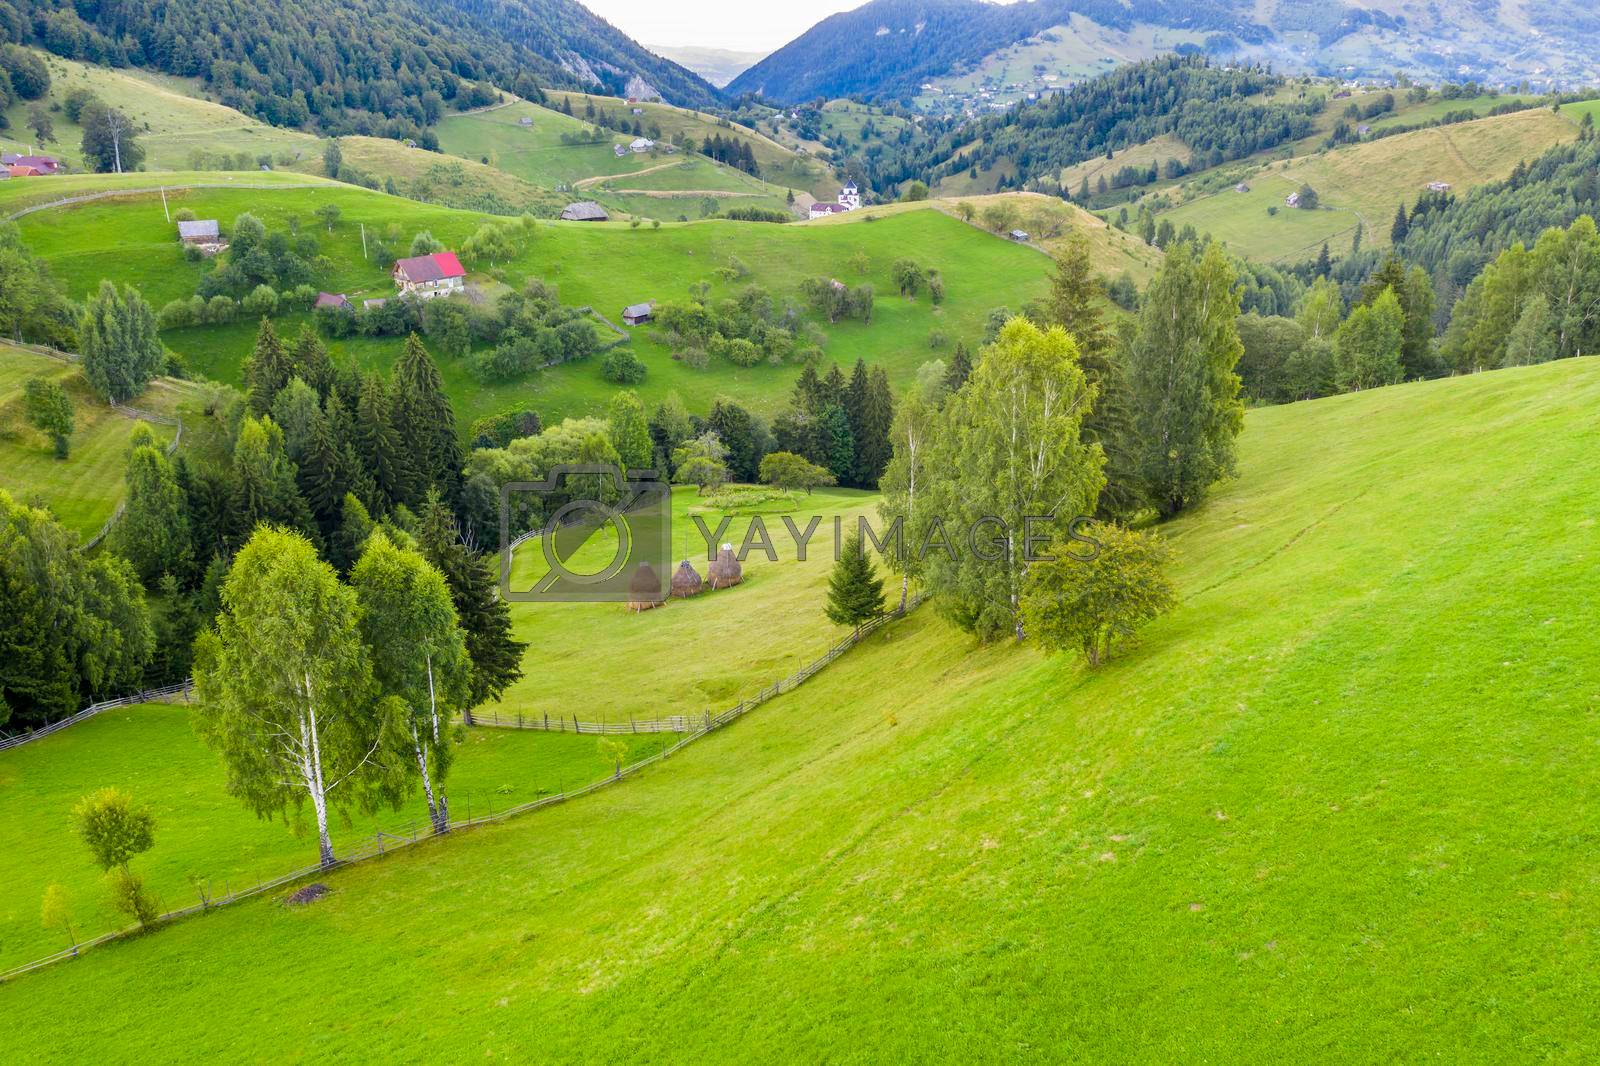 Beautiful aerial landscape from a traditional mountain village from Romanian Carpathians, Bran valley summer scene in Transylvania